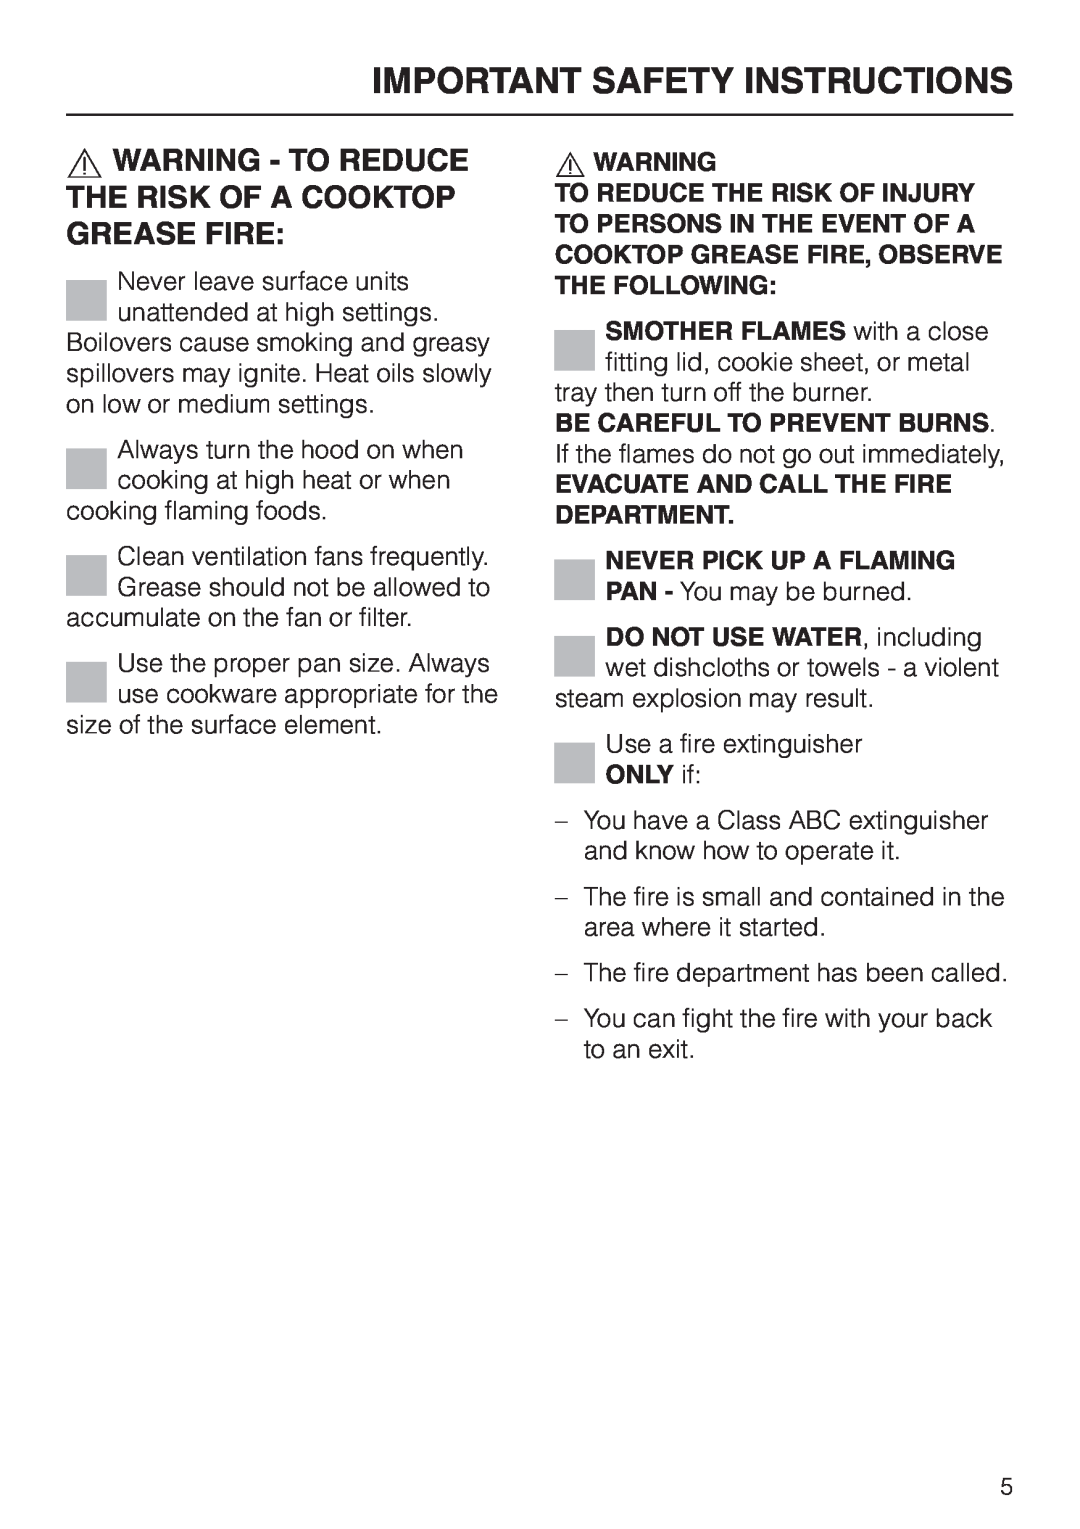 Miele DA 279-4 Important Safety Instructions, Be Careful To Prevent Burns, Evacuate And Call The Fire Department, ONLY if 